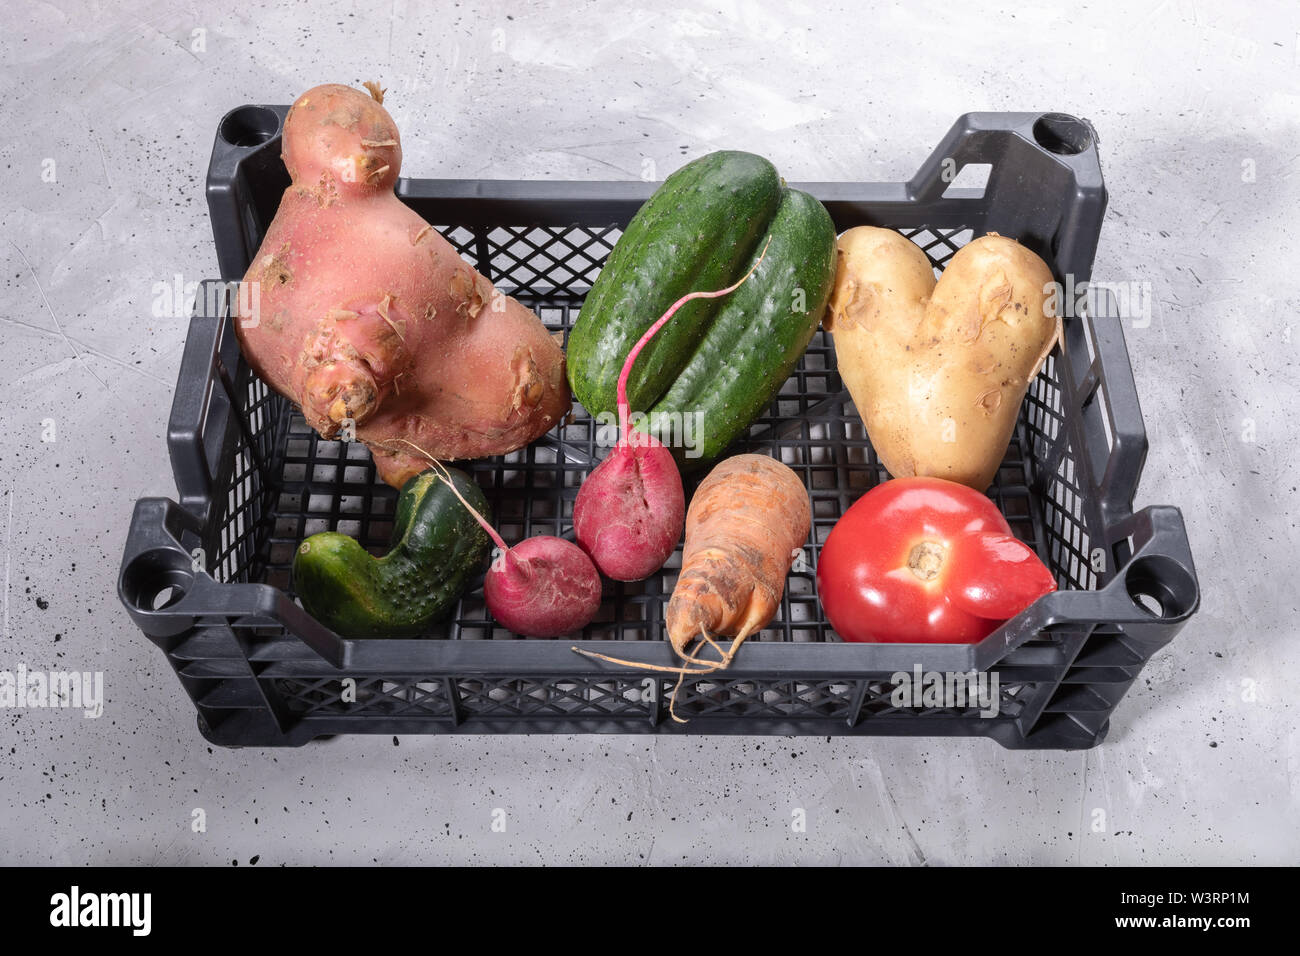 Close-up set of ripe ugly vegetables in plastic box on grey concrete background. Stock Photo